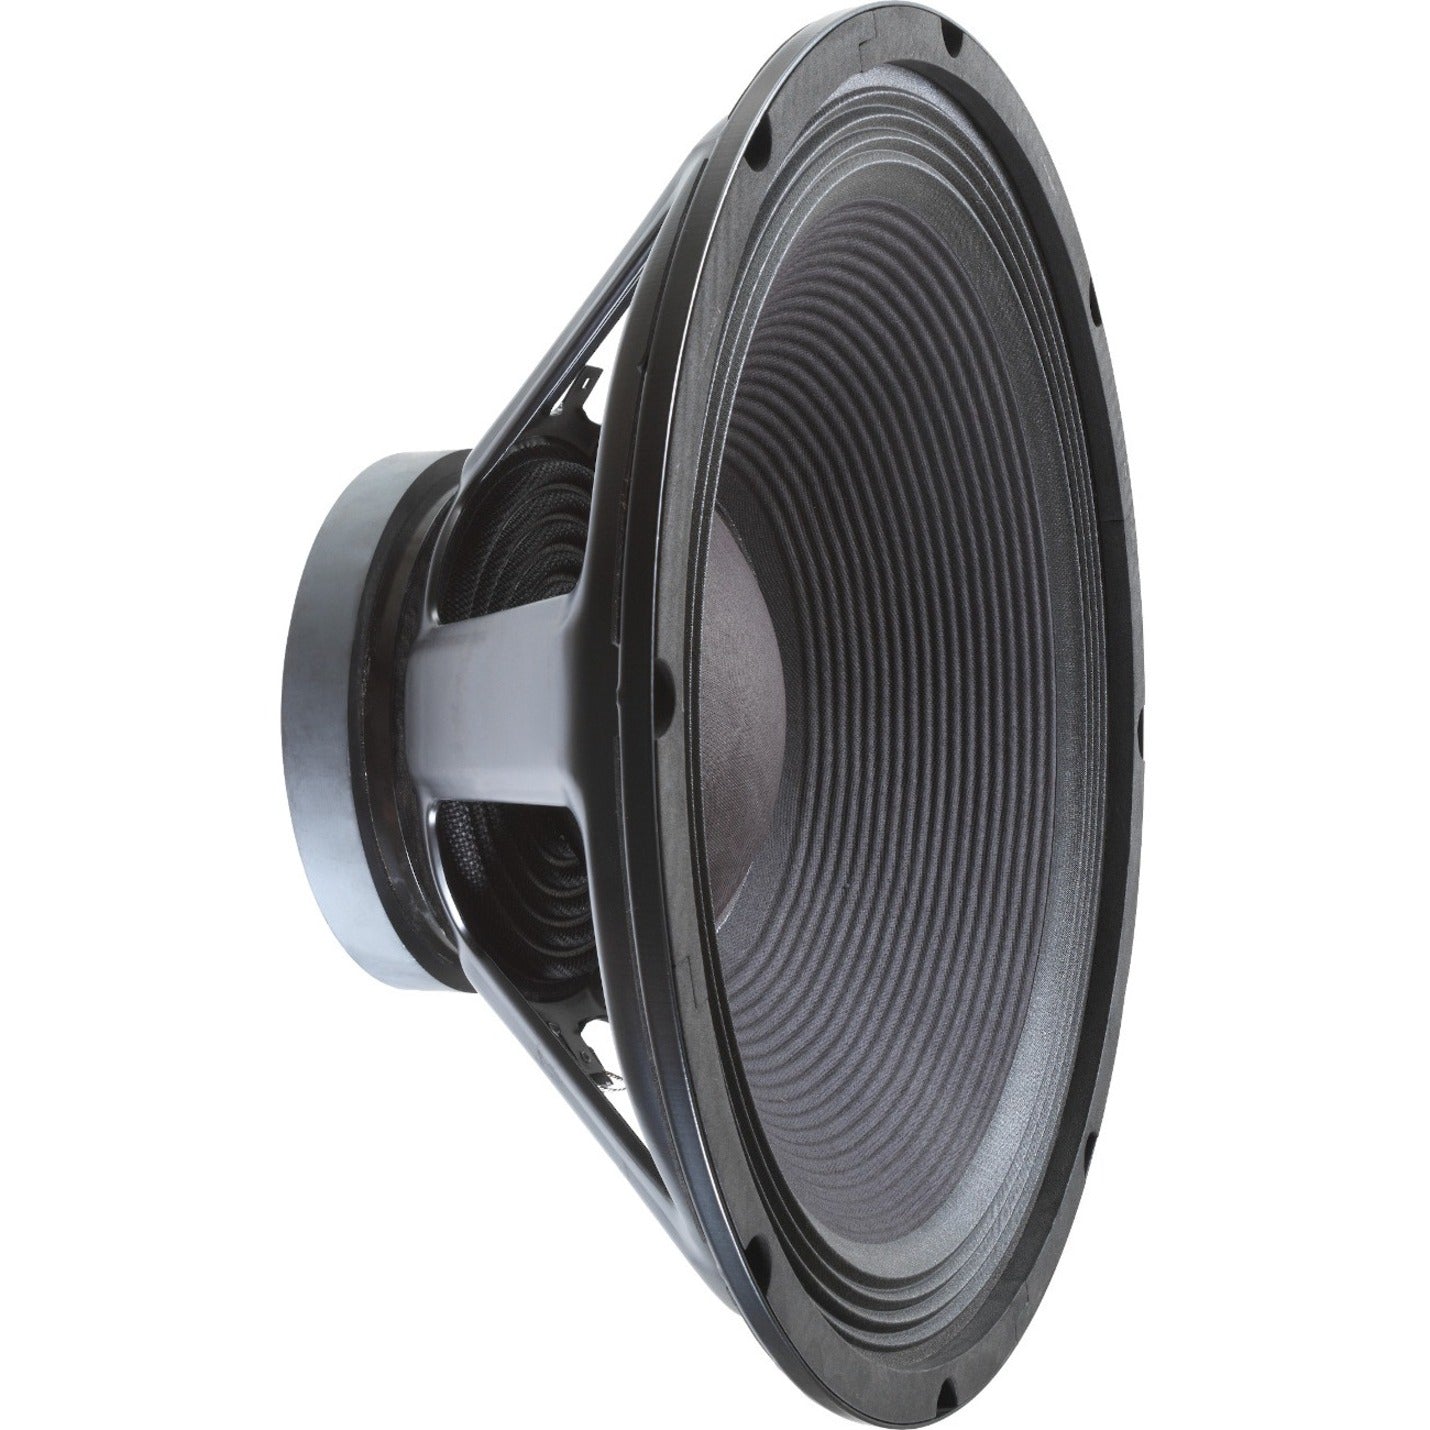 JBL Professional JBL-EON718S-NA EON718S Powered 18-inch PA Subwoofer, 650W RMS Output Power, Pole-mountable